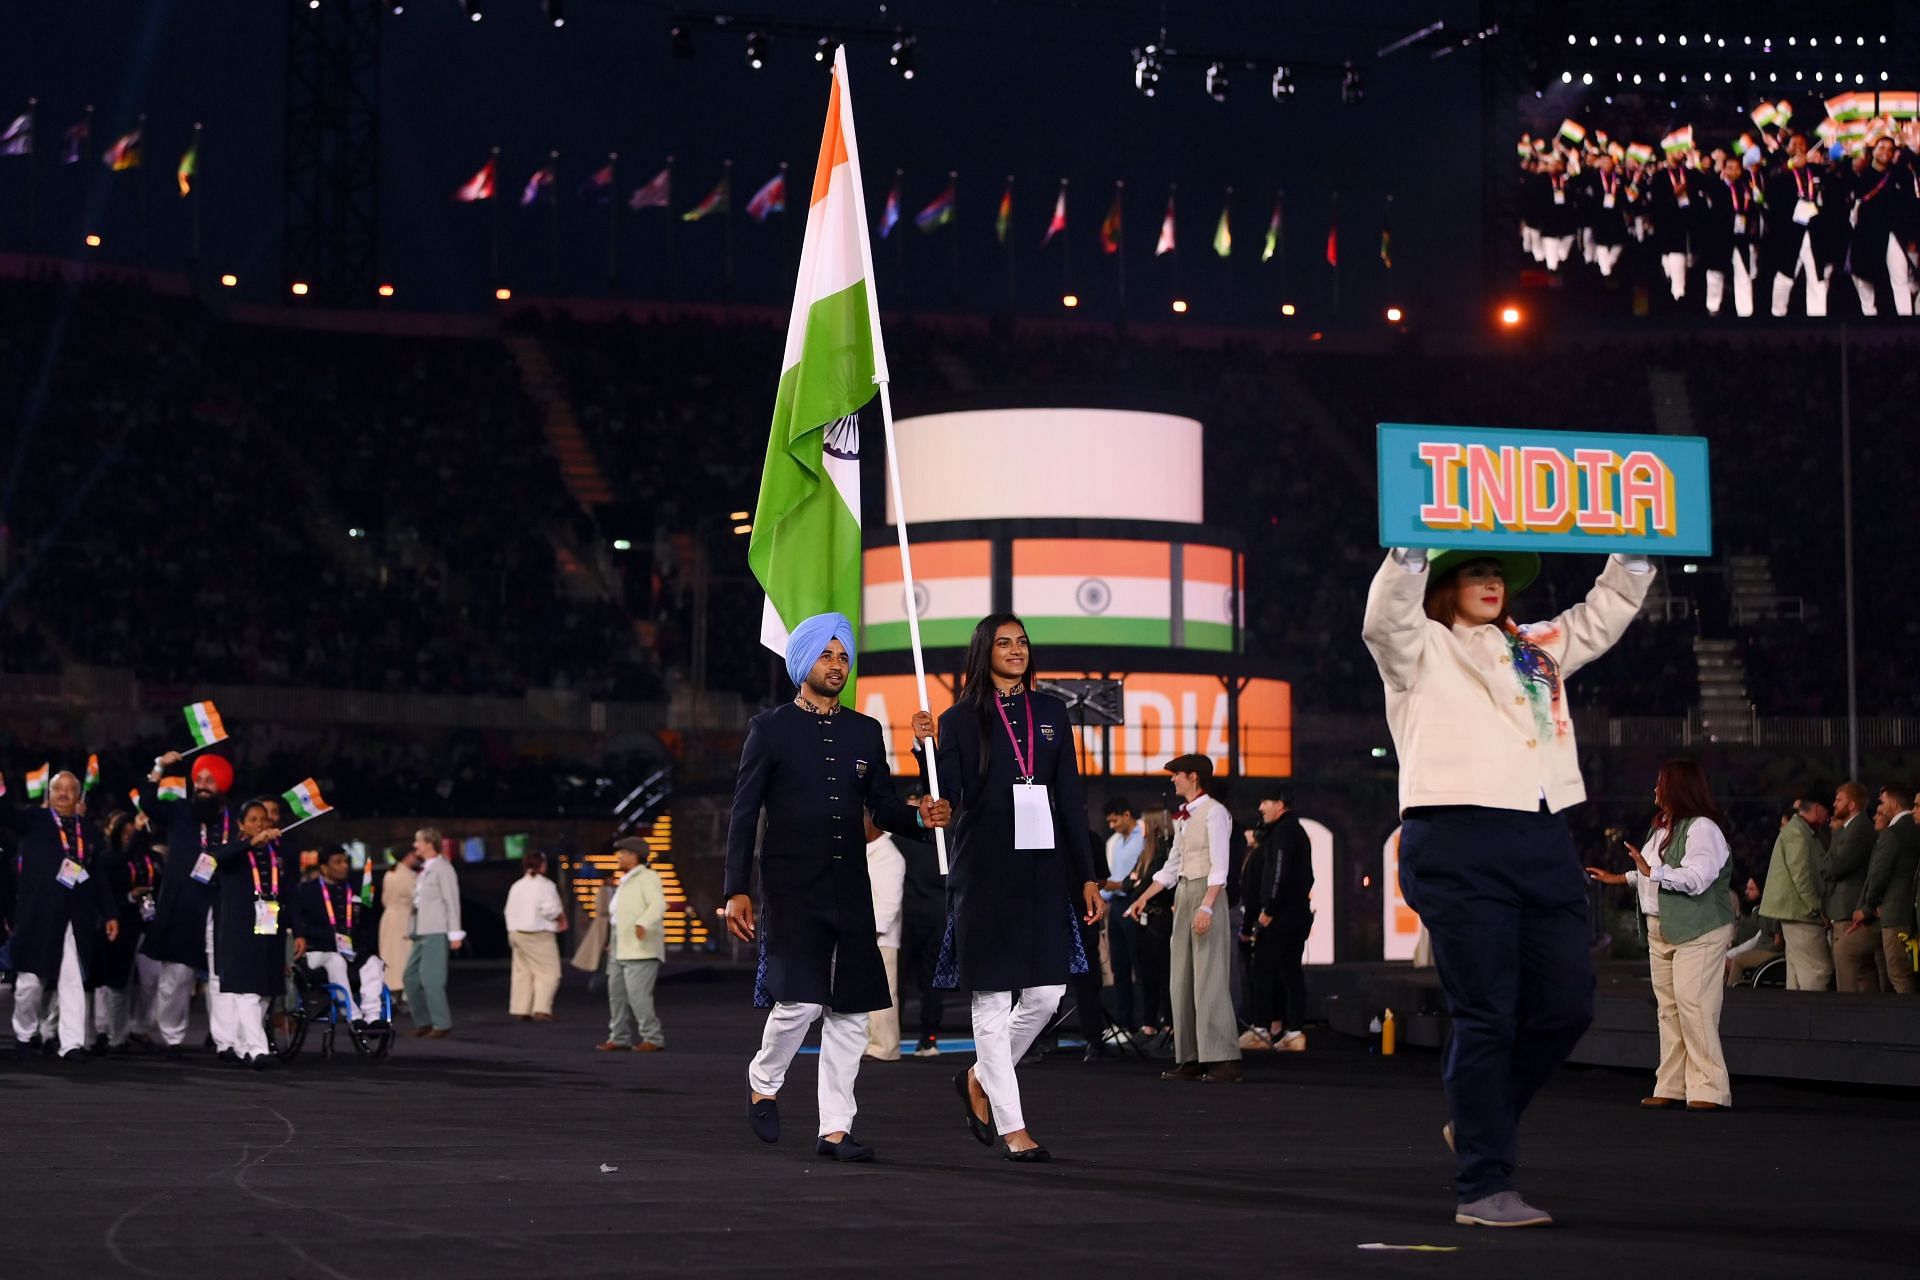 Manpreet Singh and PV Sindhu leading the Indian contingent at CWG Opening Ceremony. (PC: Getty)